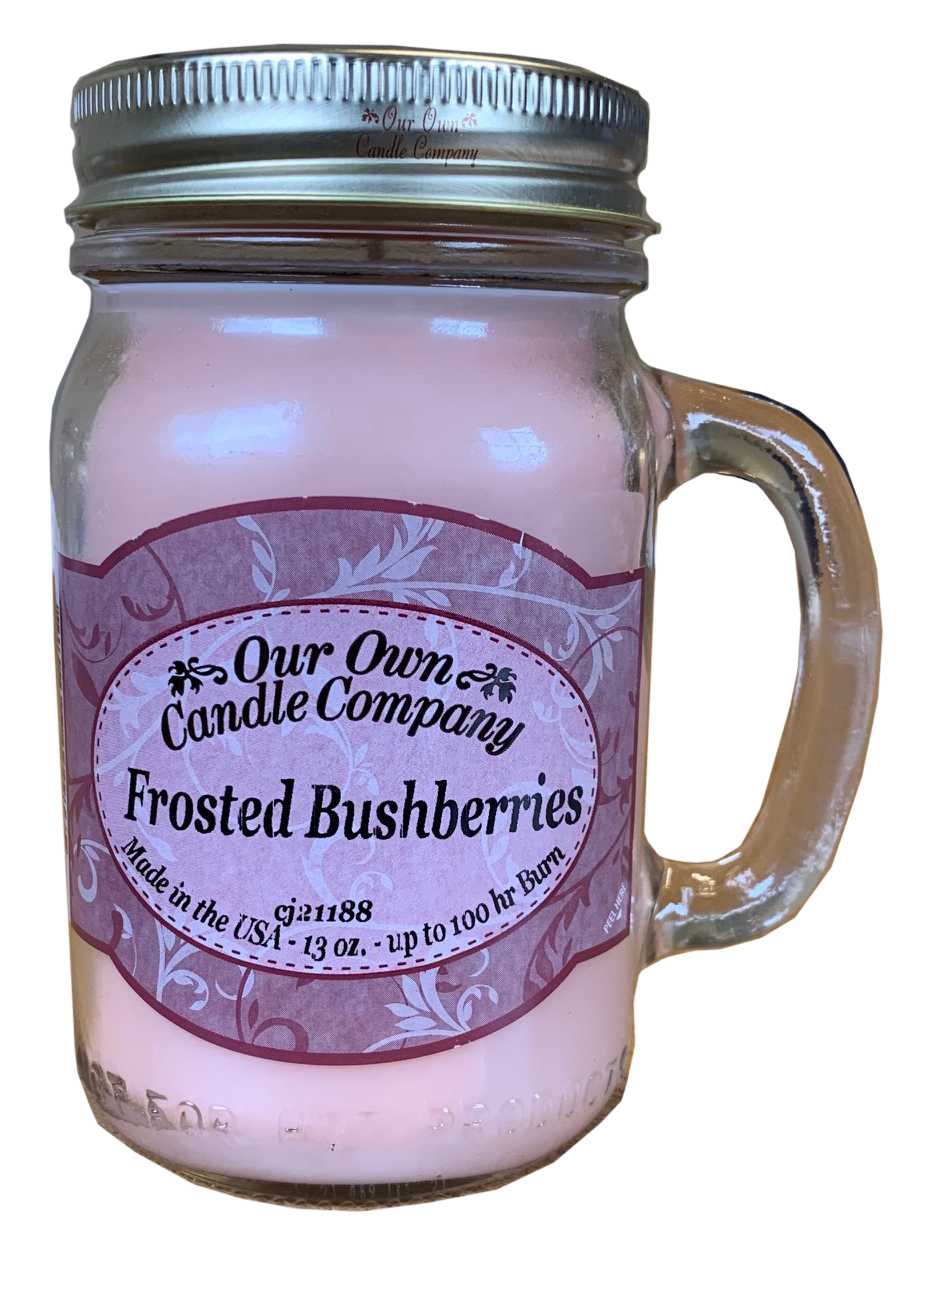 Frosted Bushberries - 13 oz. Mason Jar Candles